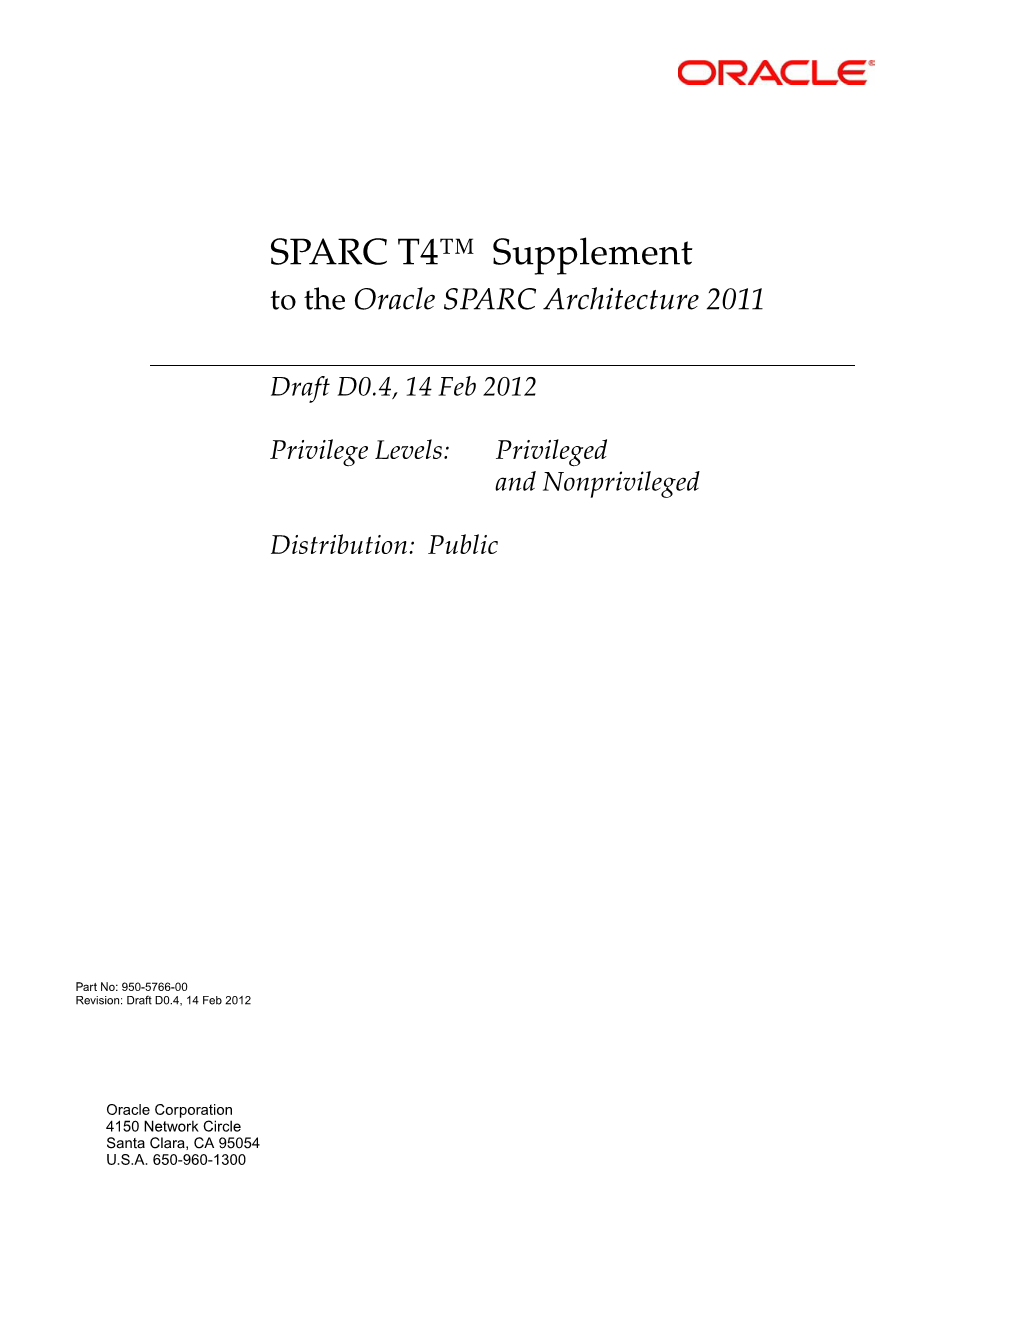 SPARC T4™ Supplement to the Oracle SPARC Architecture 2011